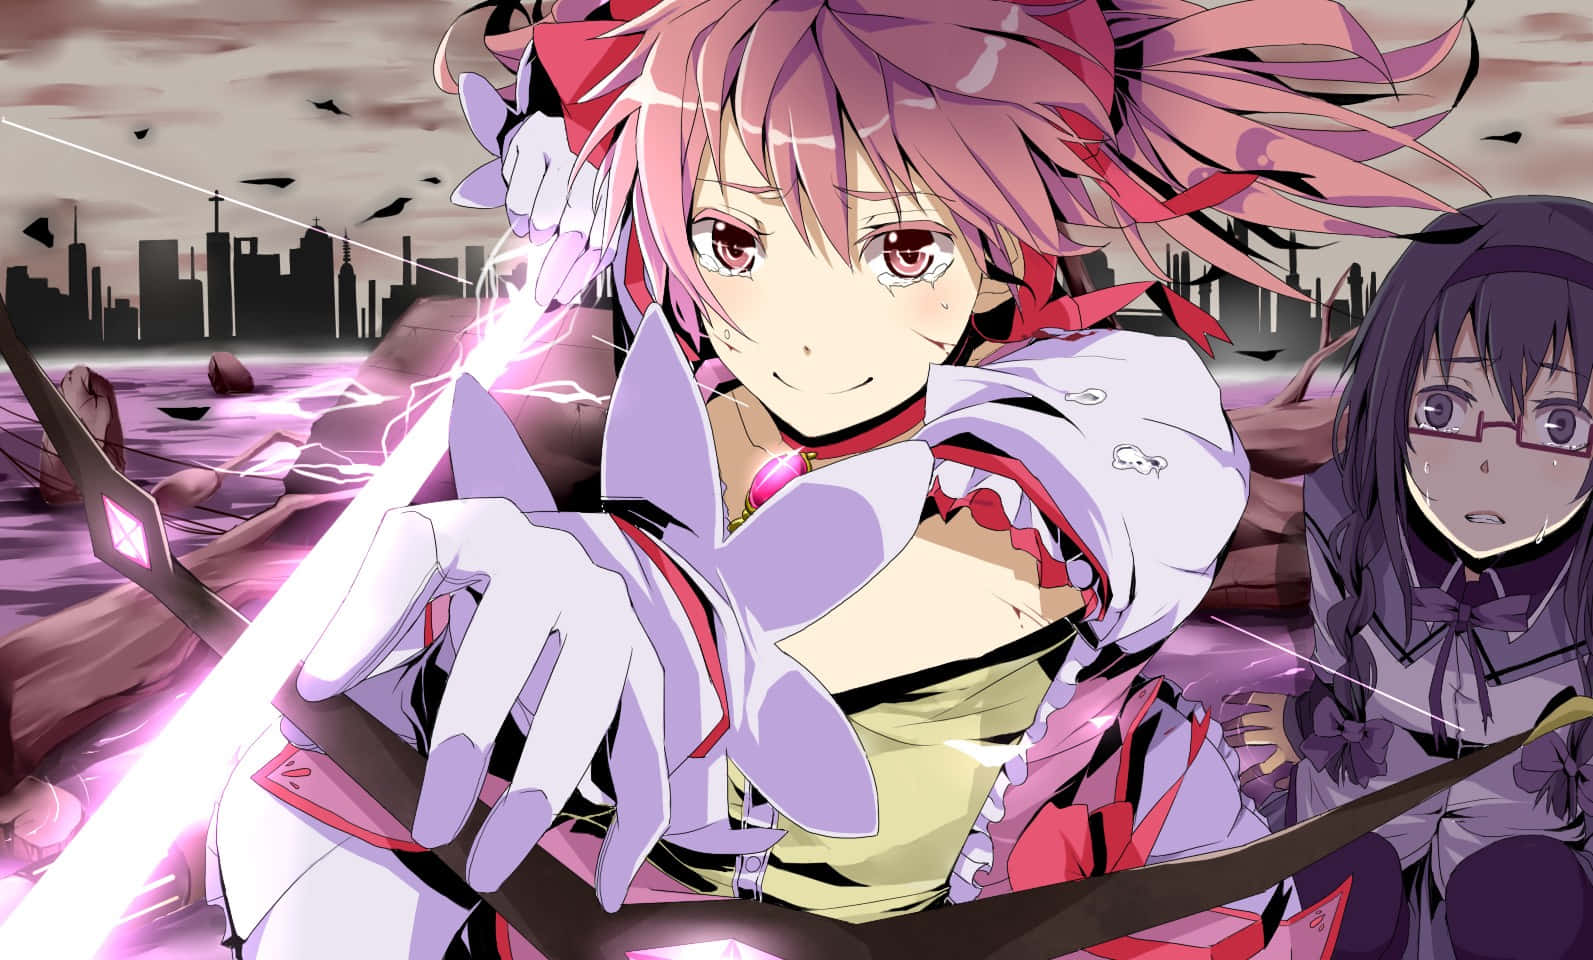 Join Madoka Kaname in her Fight Against Witches